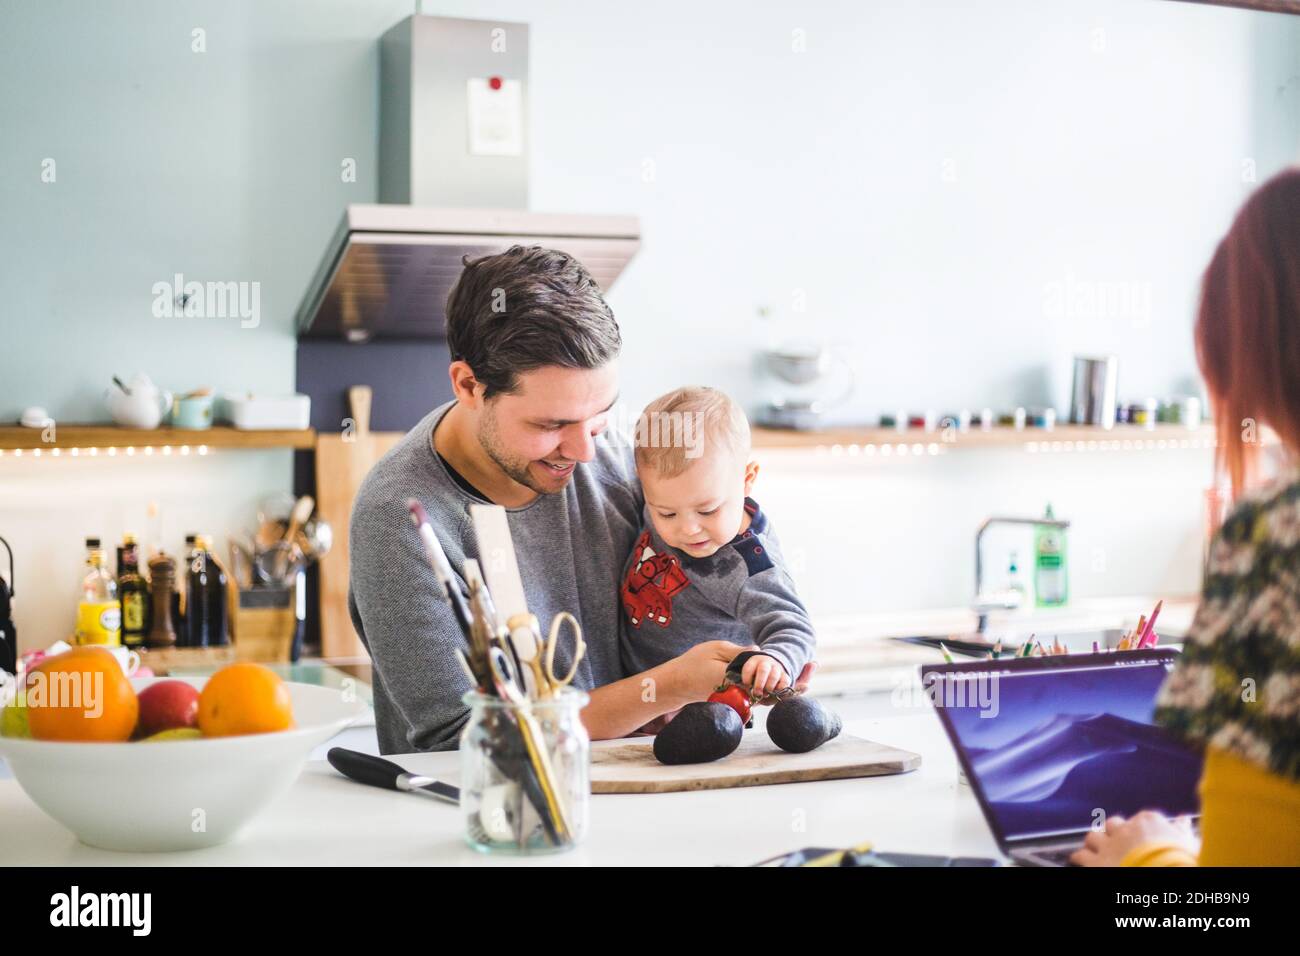 Smiling man carrying son holding tomato on cutting board at kitchen island Stock Photo